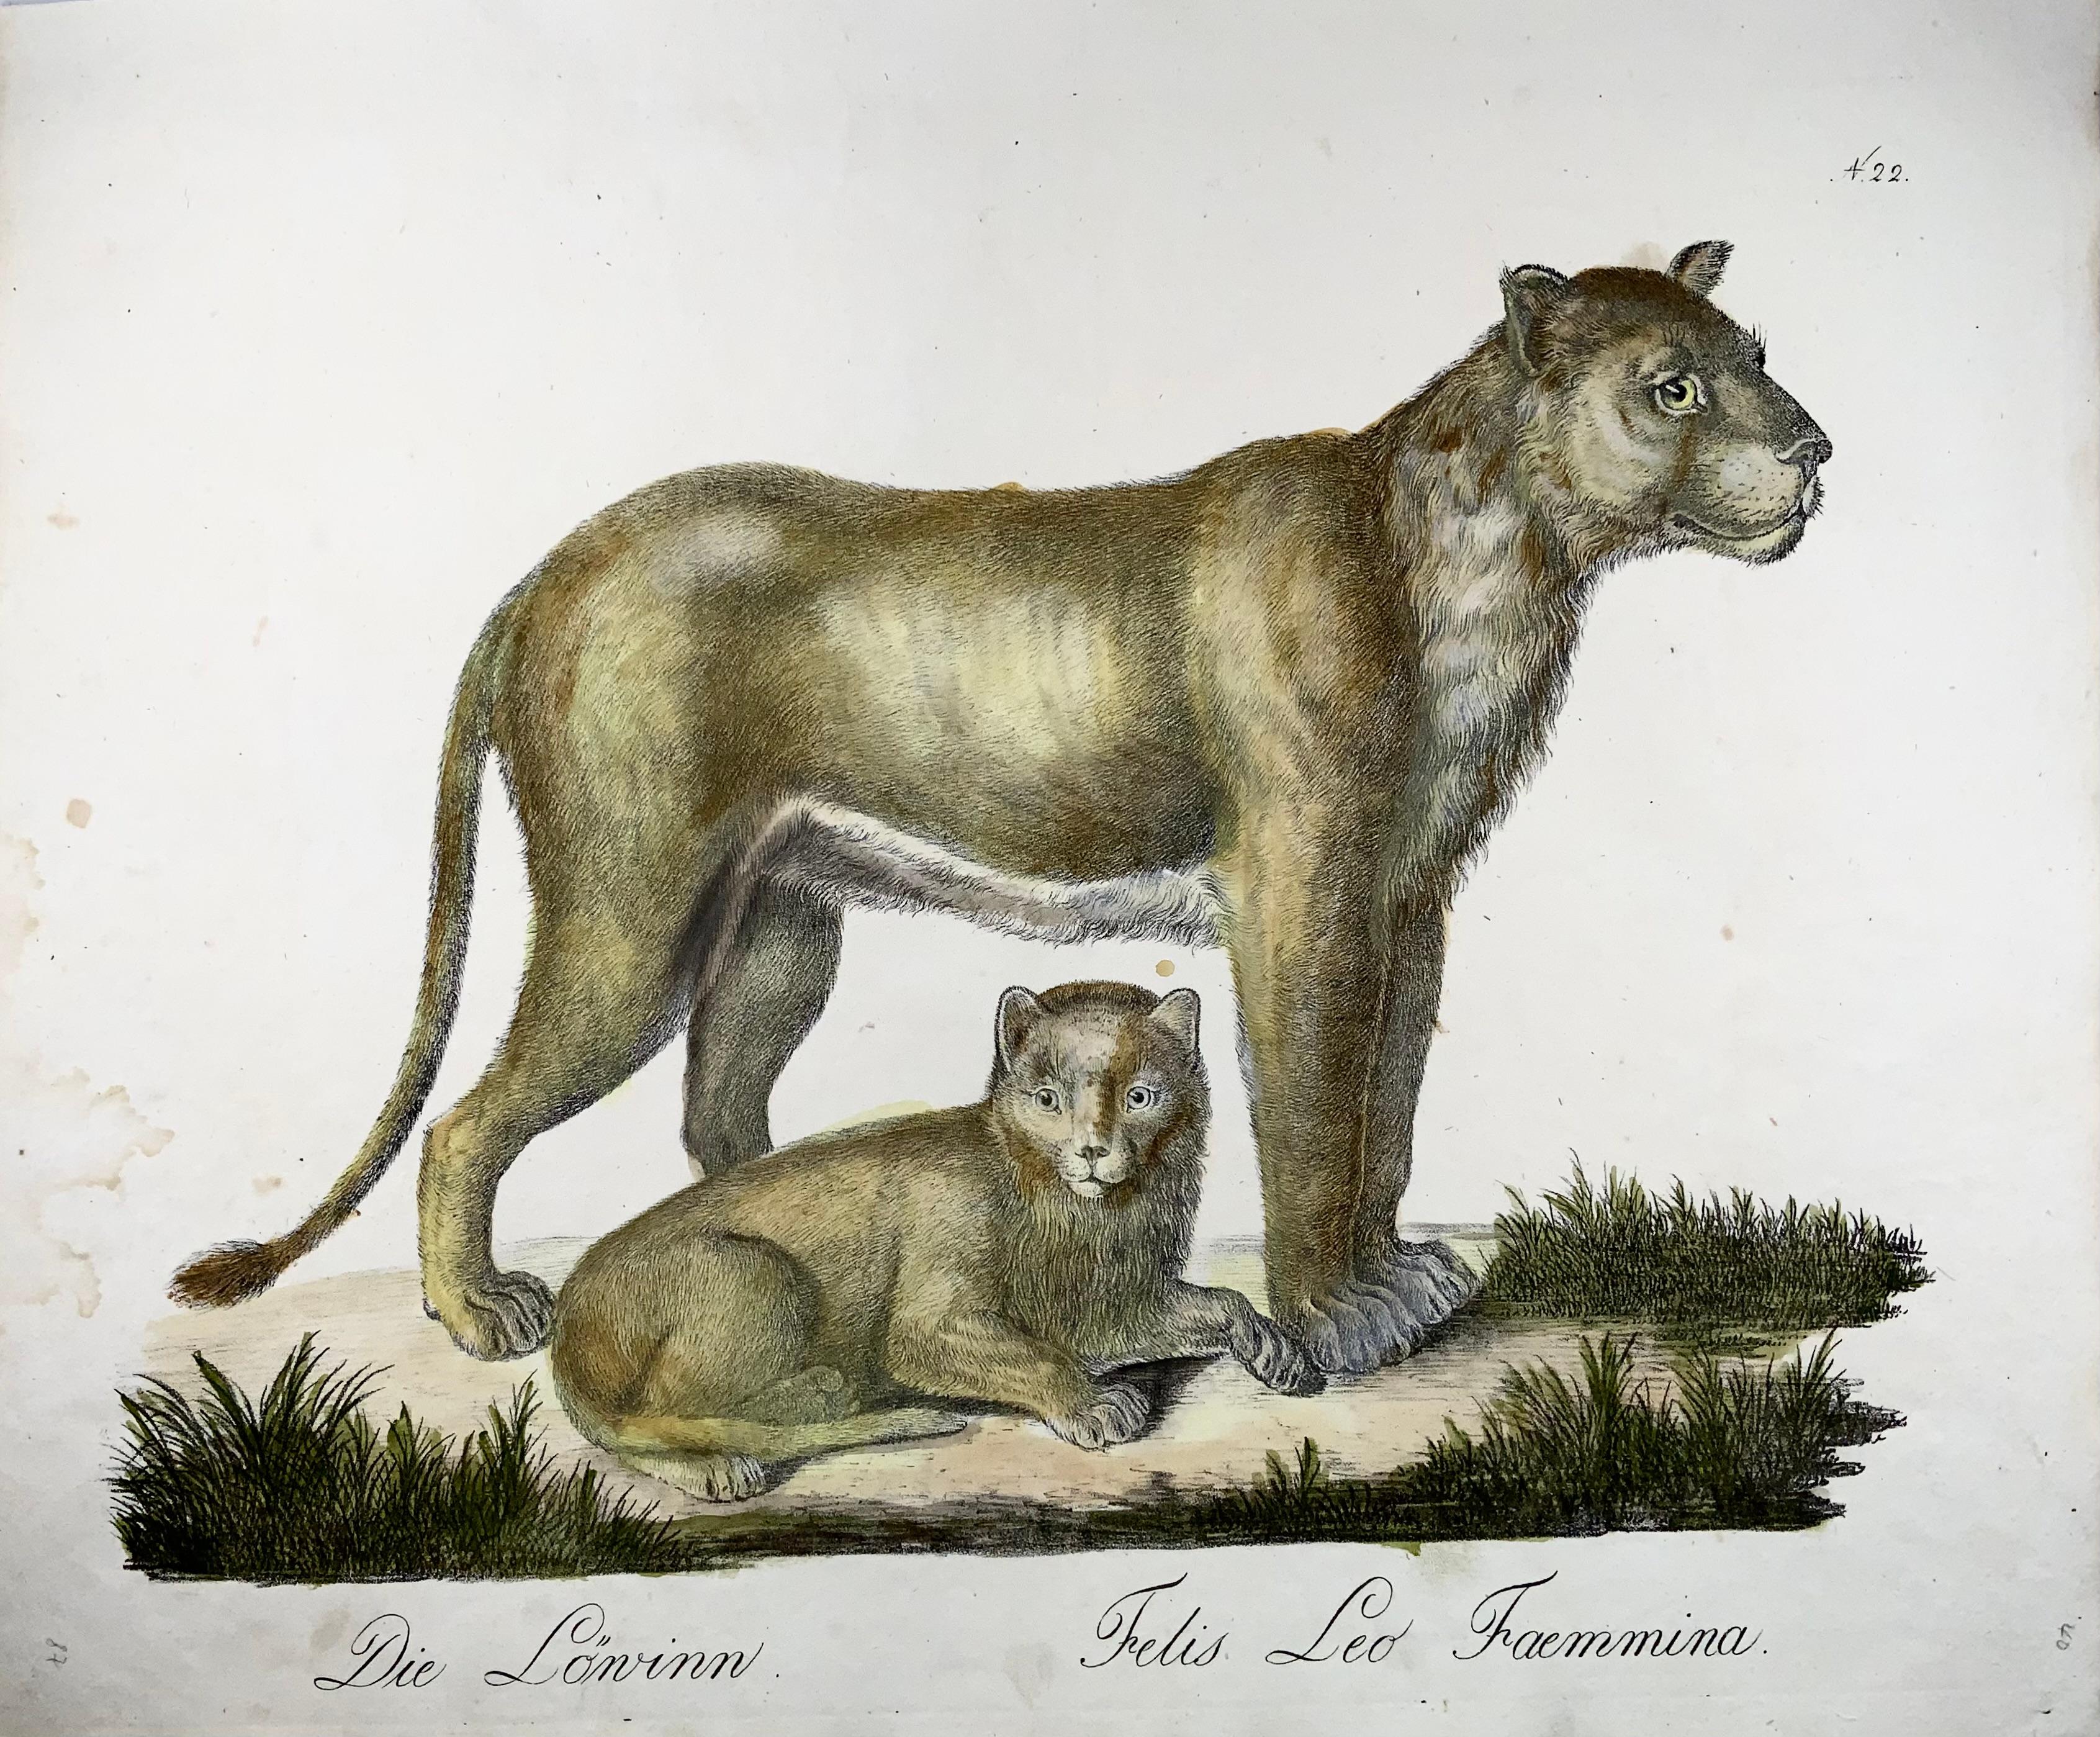 Die Loewinn // Felis Leo Faemmina

Landmark stone lithograph on fine Ziegler watermarked paper.

Extremely rare 

1816 antique hand colored stone lithograph by Carl Joseph Brodtmann from his extremely rare series:

Naturhistorische Bilder